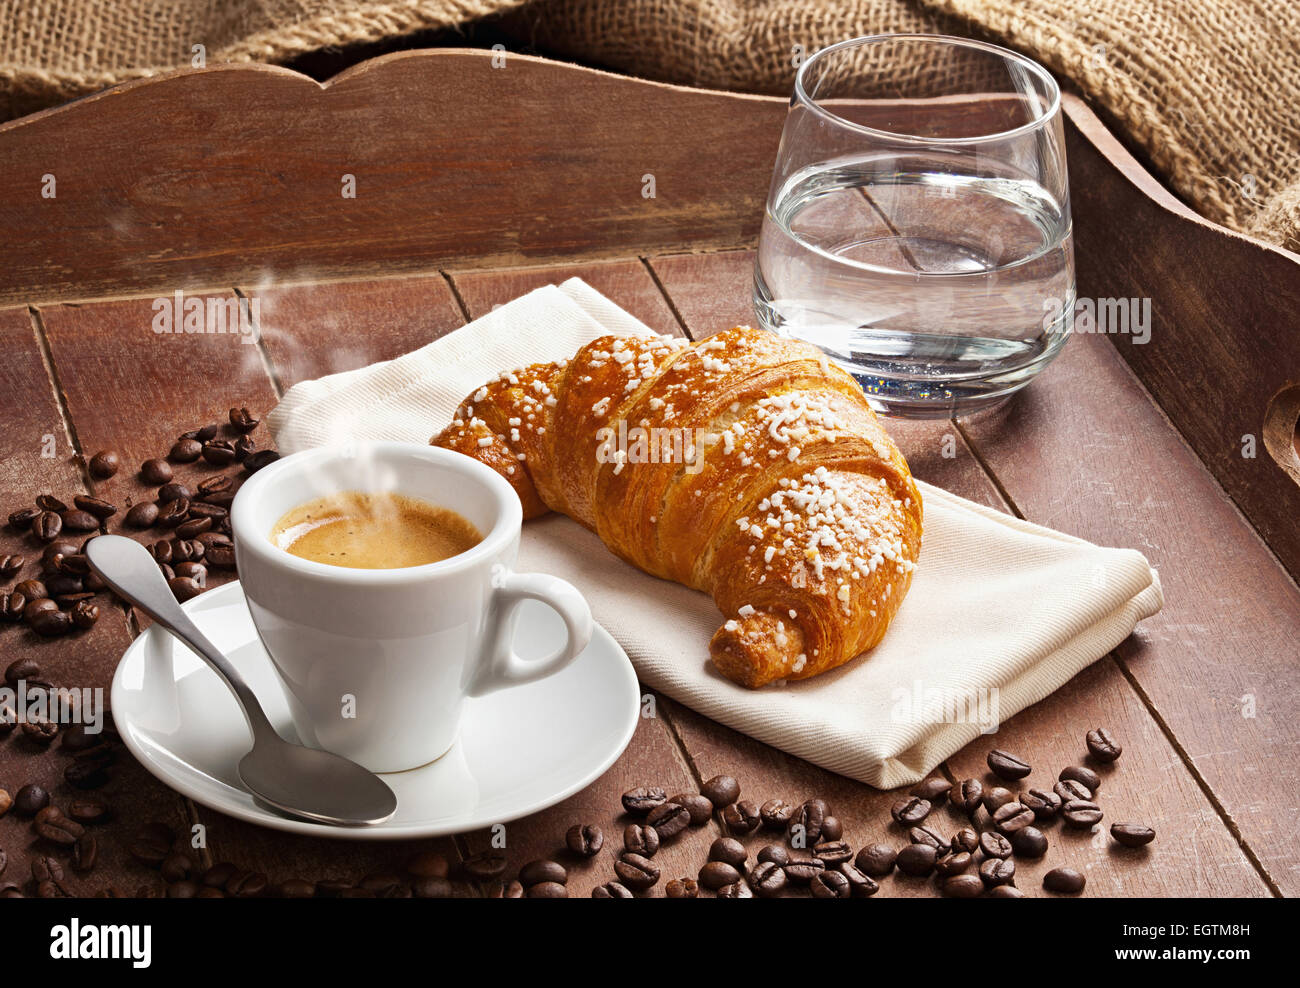 Espresso with croissant and glass of water in the tray of brown wood. Stock Photo